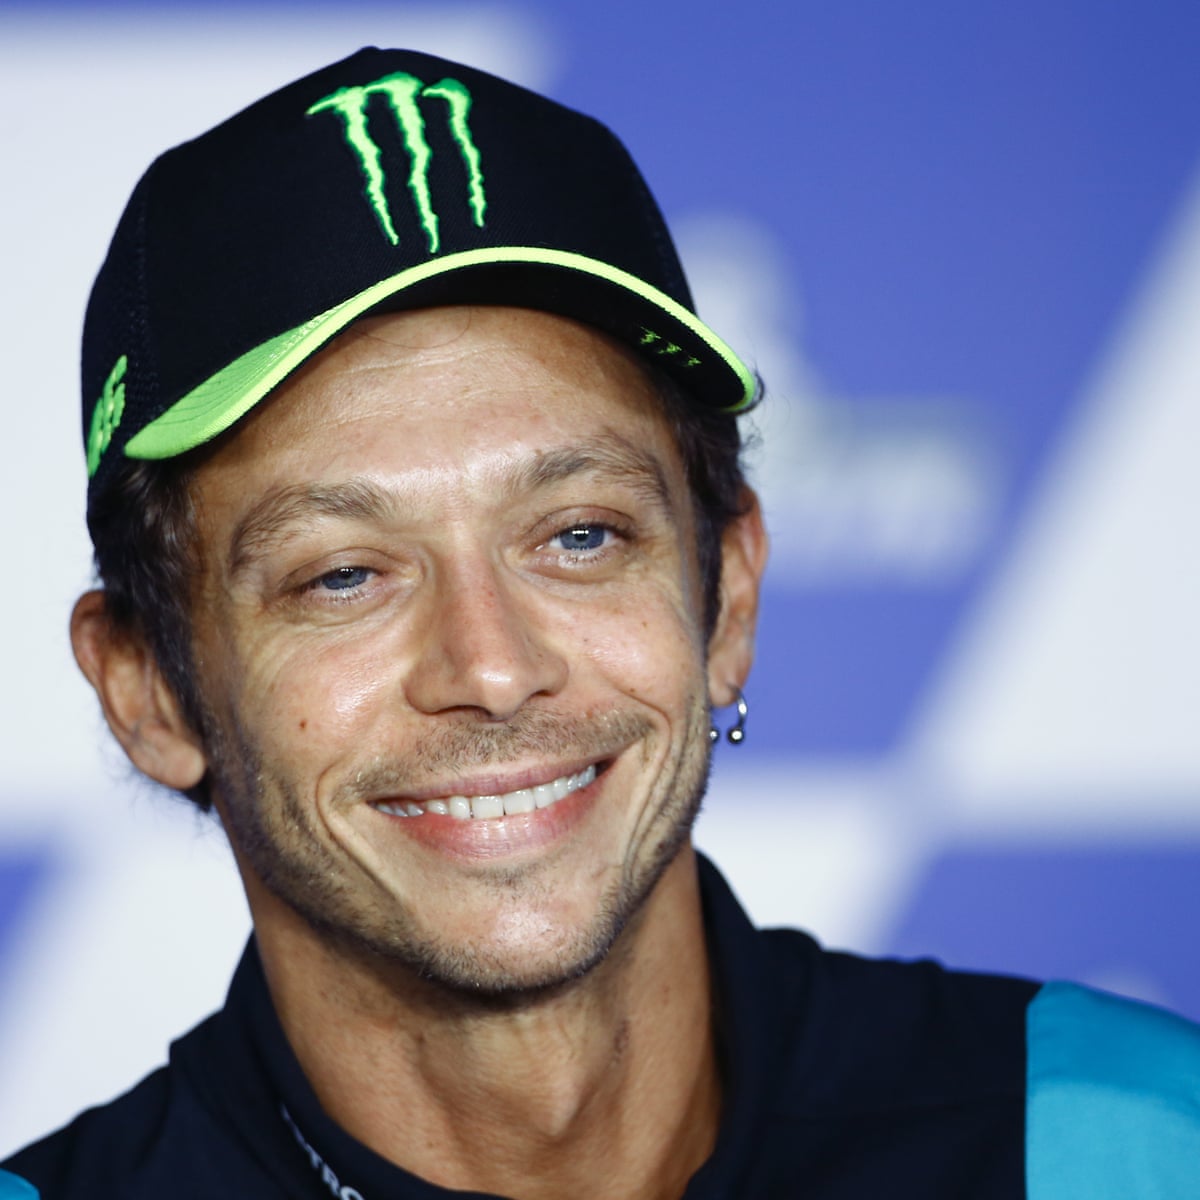 Nine-time champion Valentino Rossi to retire at end of MotoGP